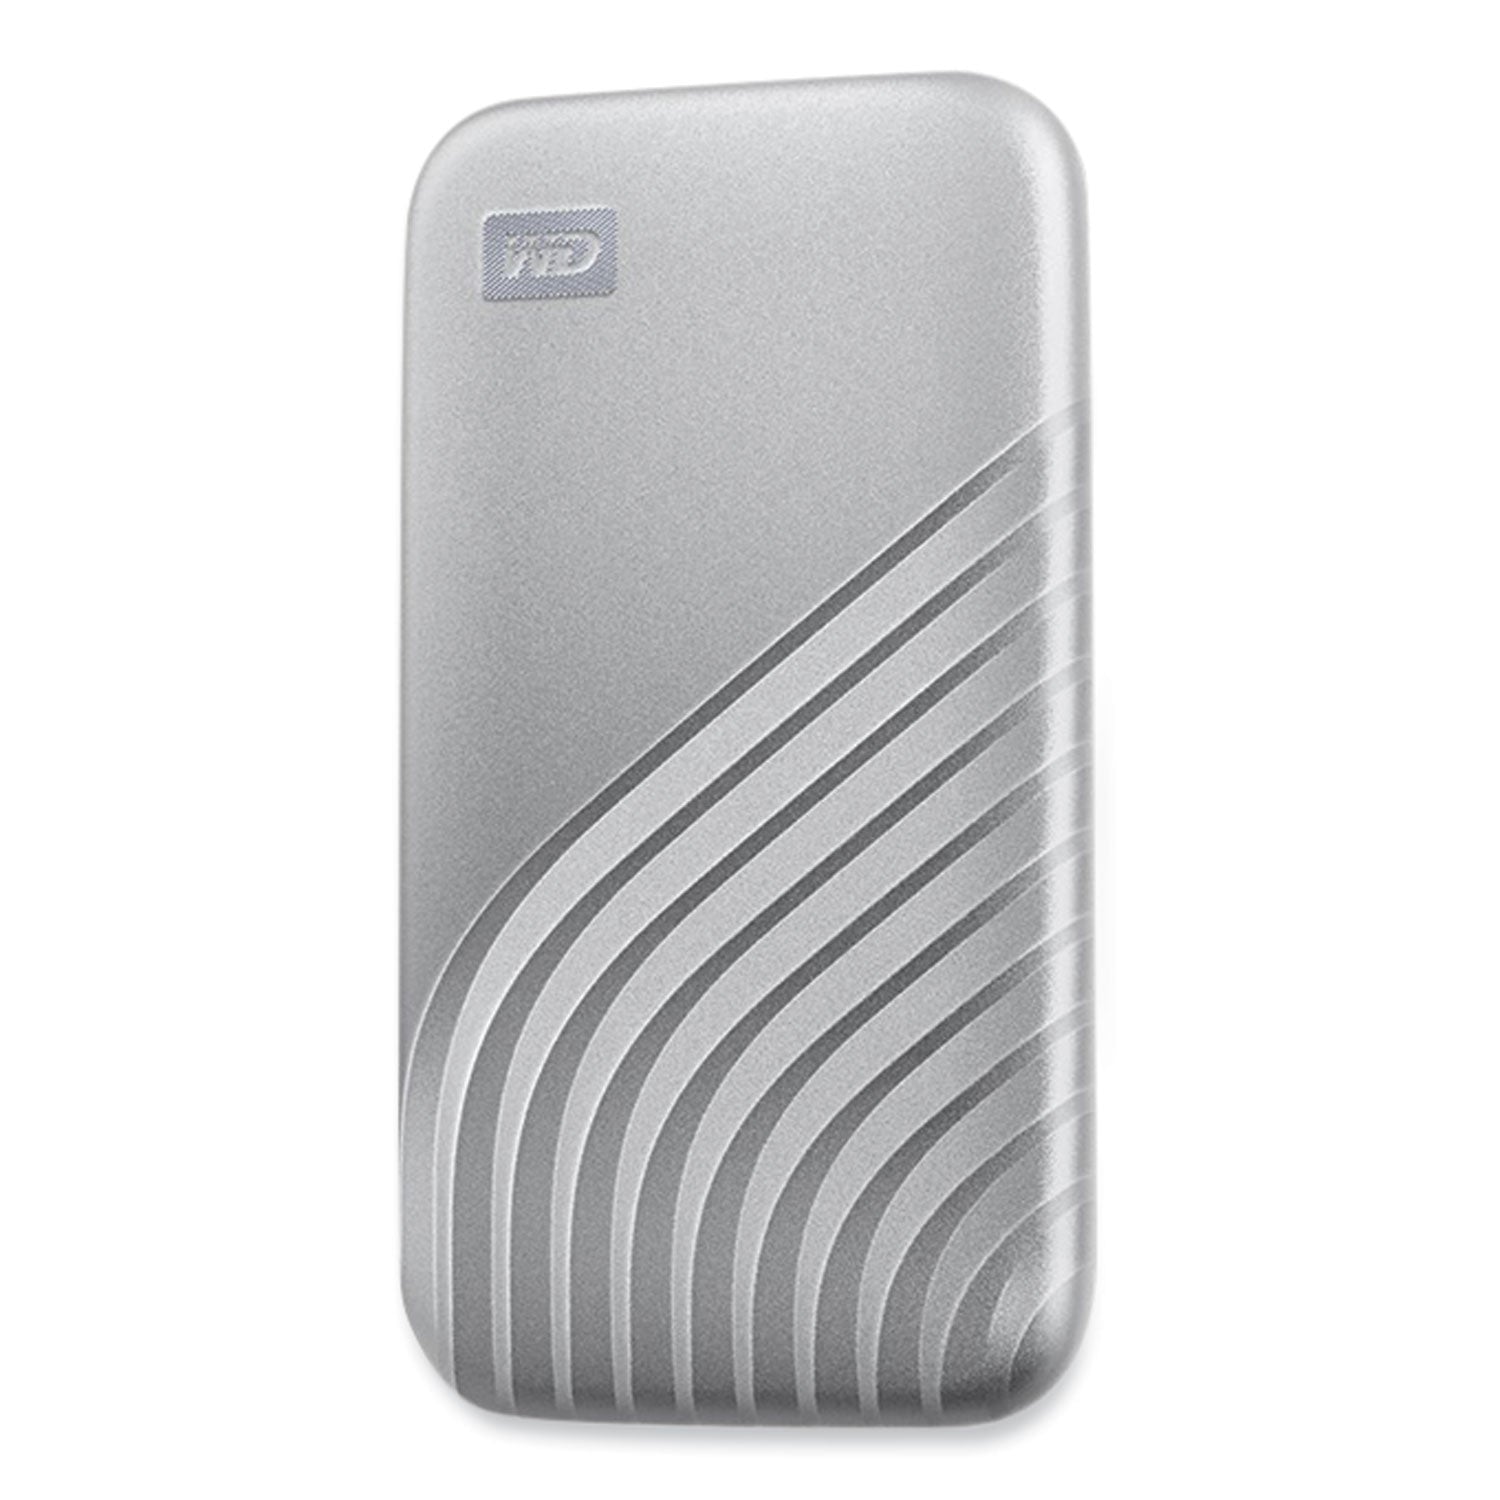 my-passport-external-solid-state-drive-1-tb-usb-32-silver_wdcagf0010bsl - 3